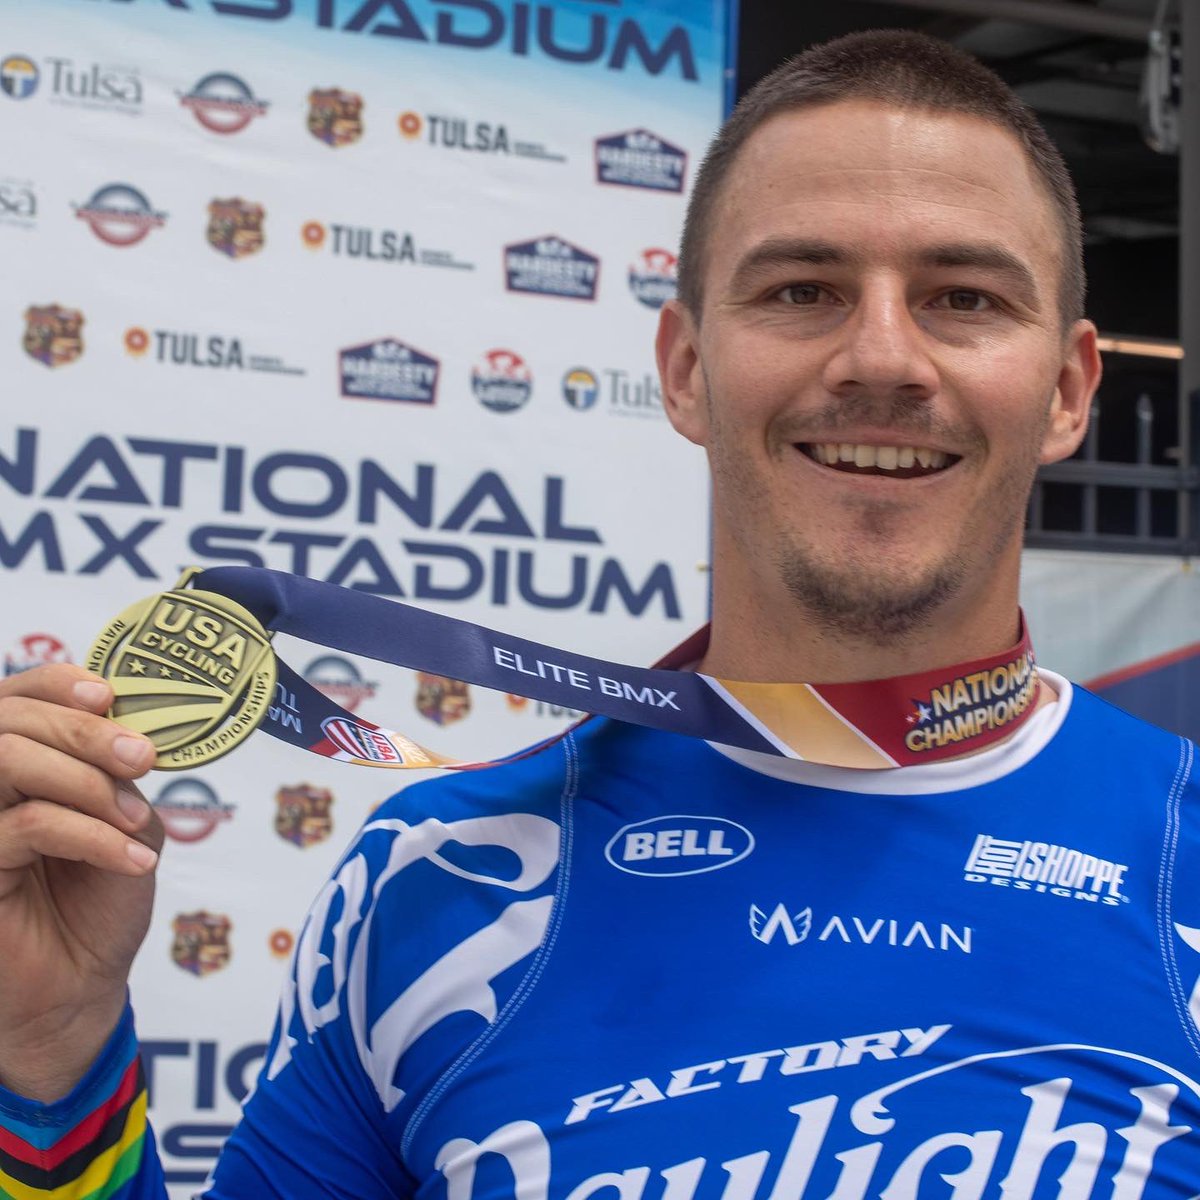 Tucson takes home the 🇺🇸! 
Sending a massive congratulations to Daleny Vaughn and Corben Sharrah for winning today’s Elite BMX National Championships! 🥇

📸: @dbetcher44 #BMXNats #BMXRacing